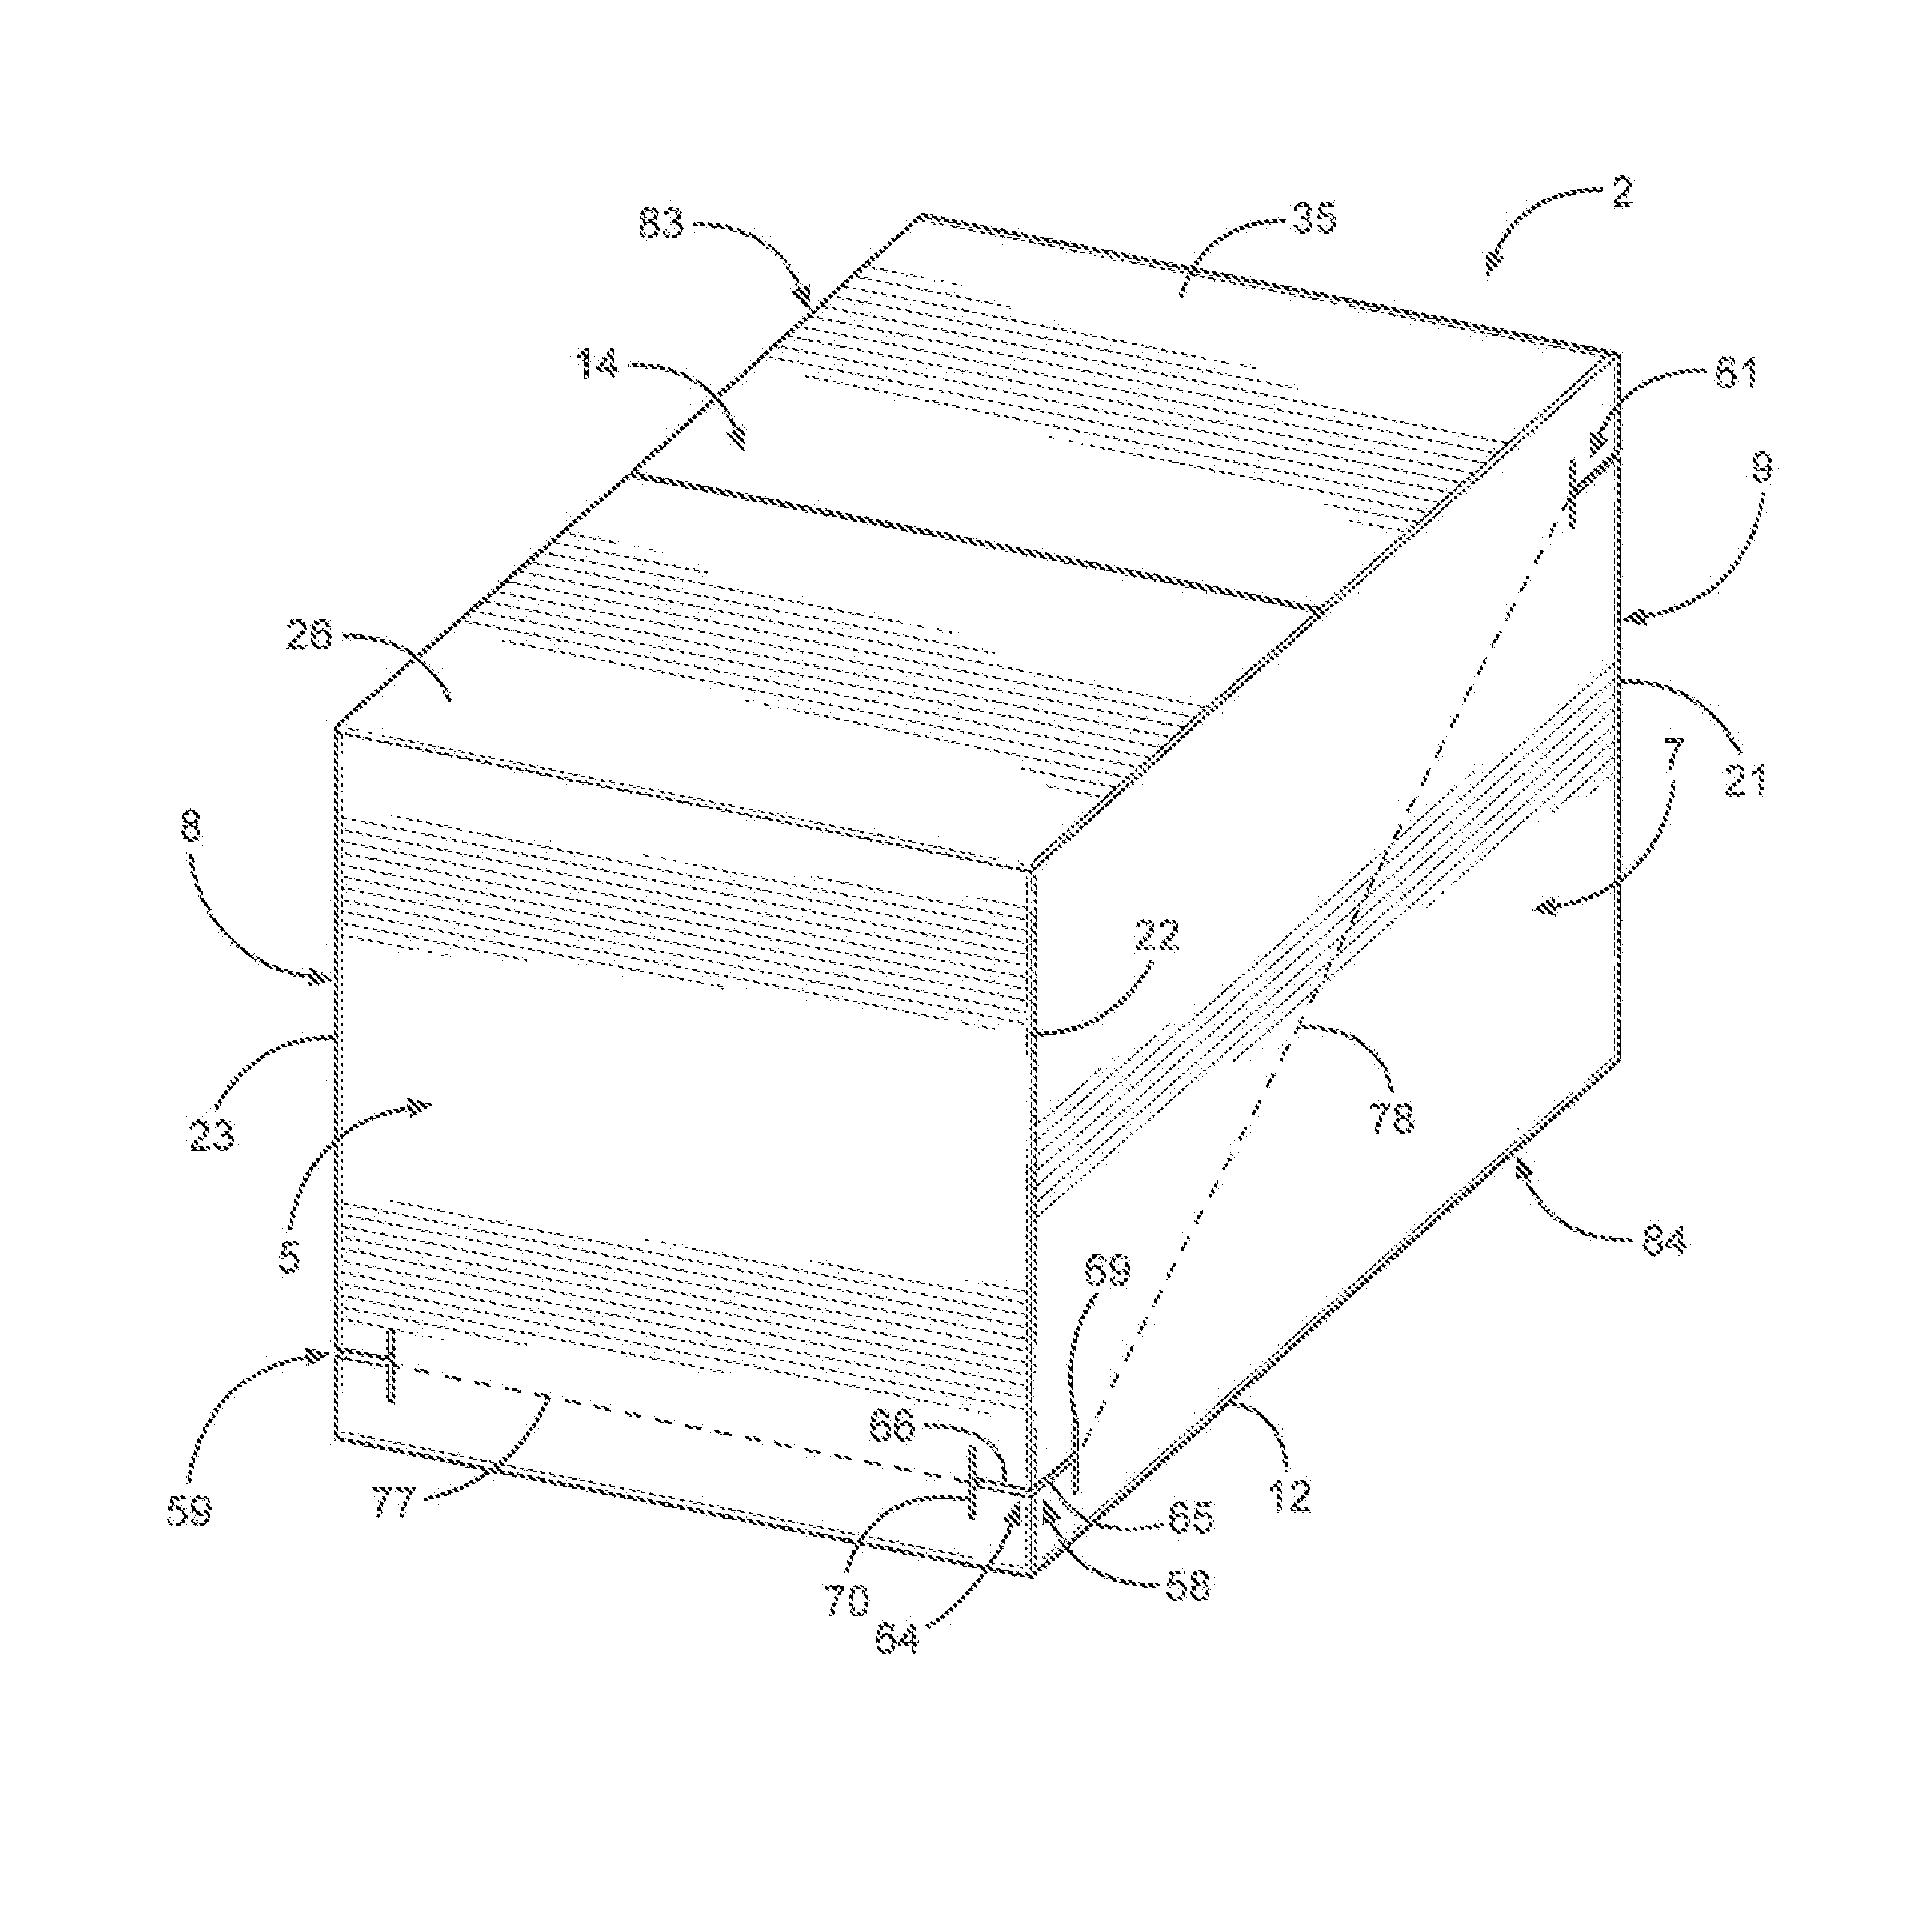 Shipping and display container